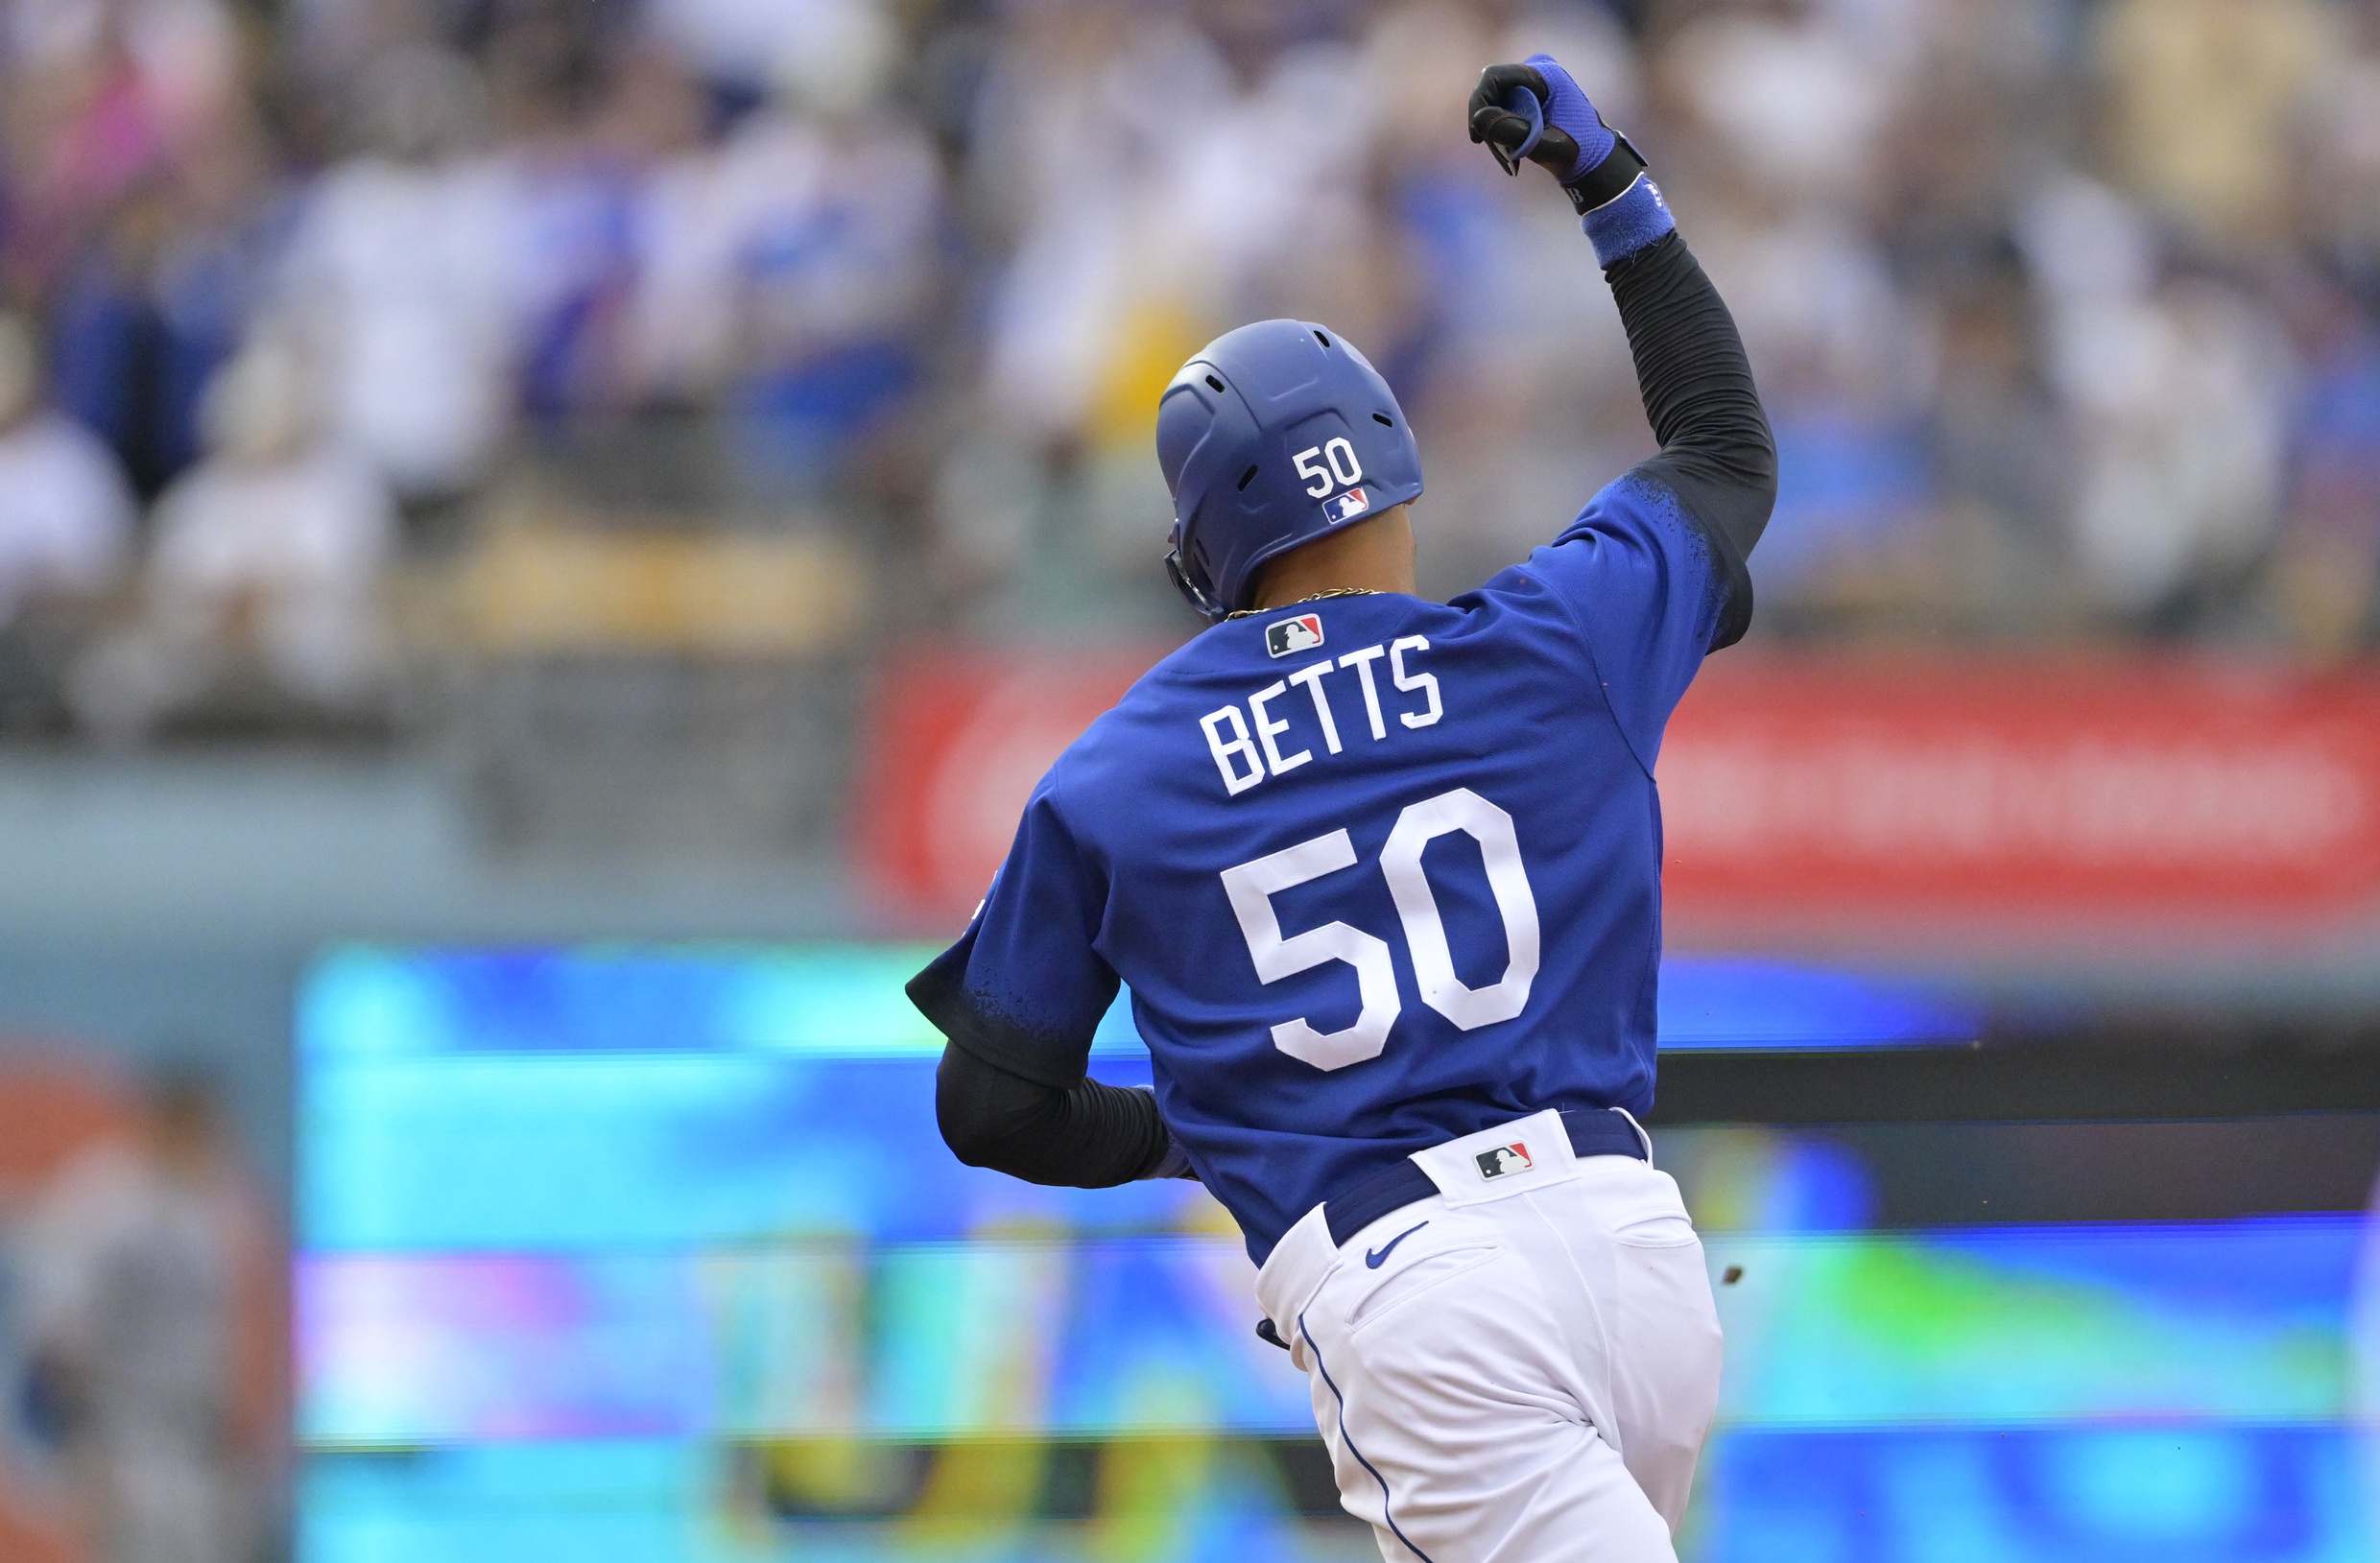 We are giving away an AUTHENTIC Mookie Betts Dodgers jersey!! All